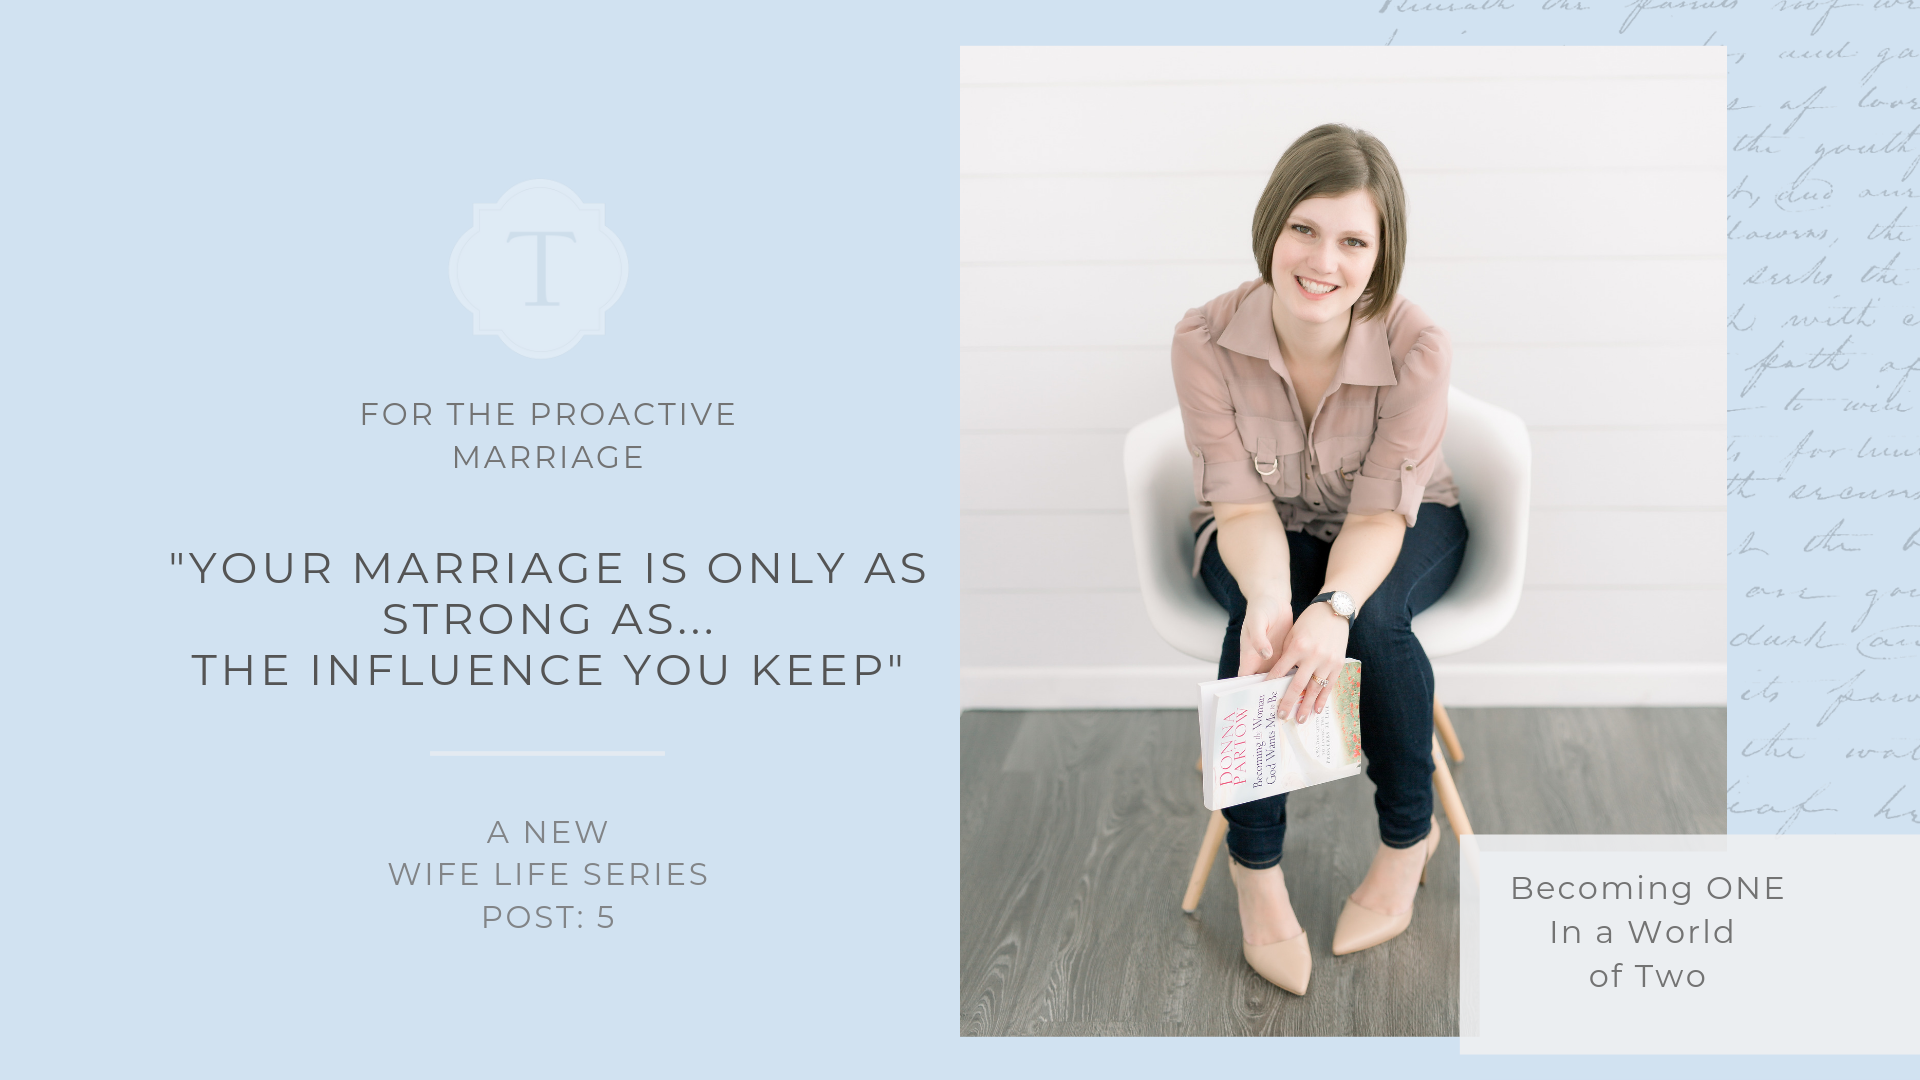 The influence impact in your marriage